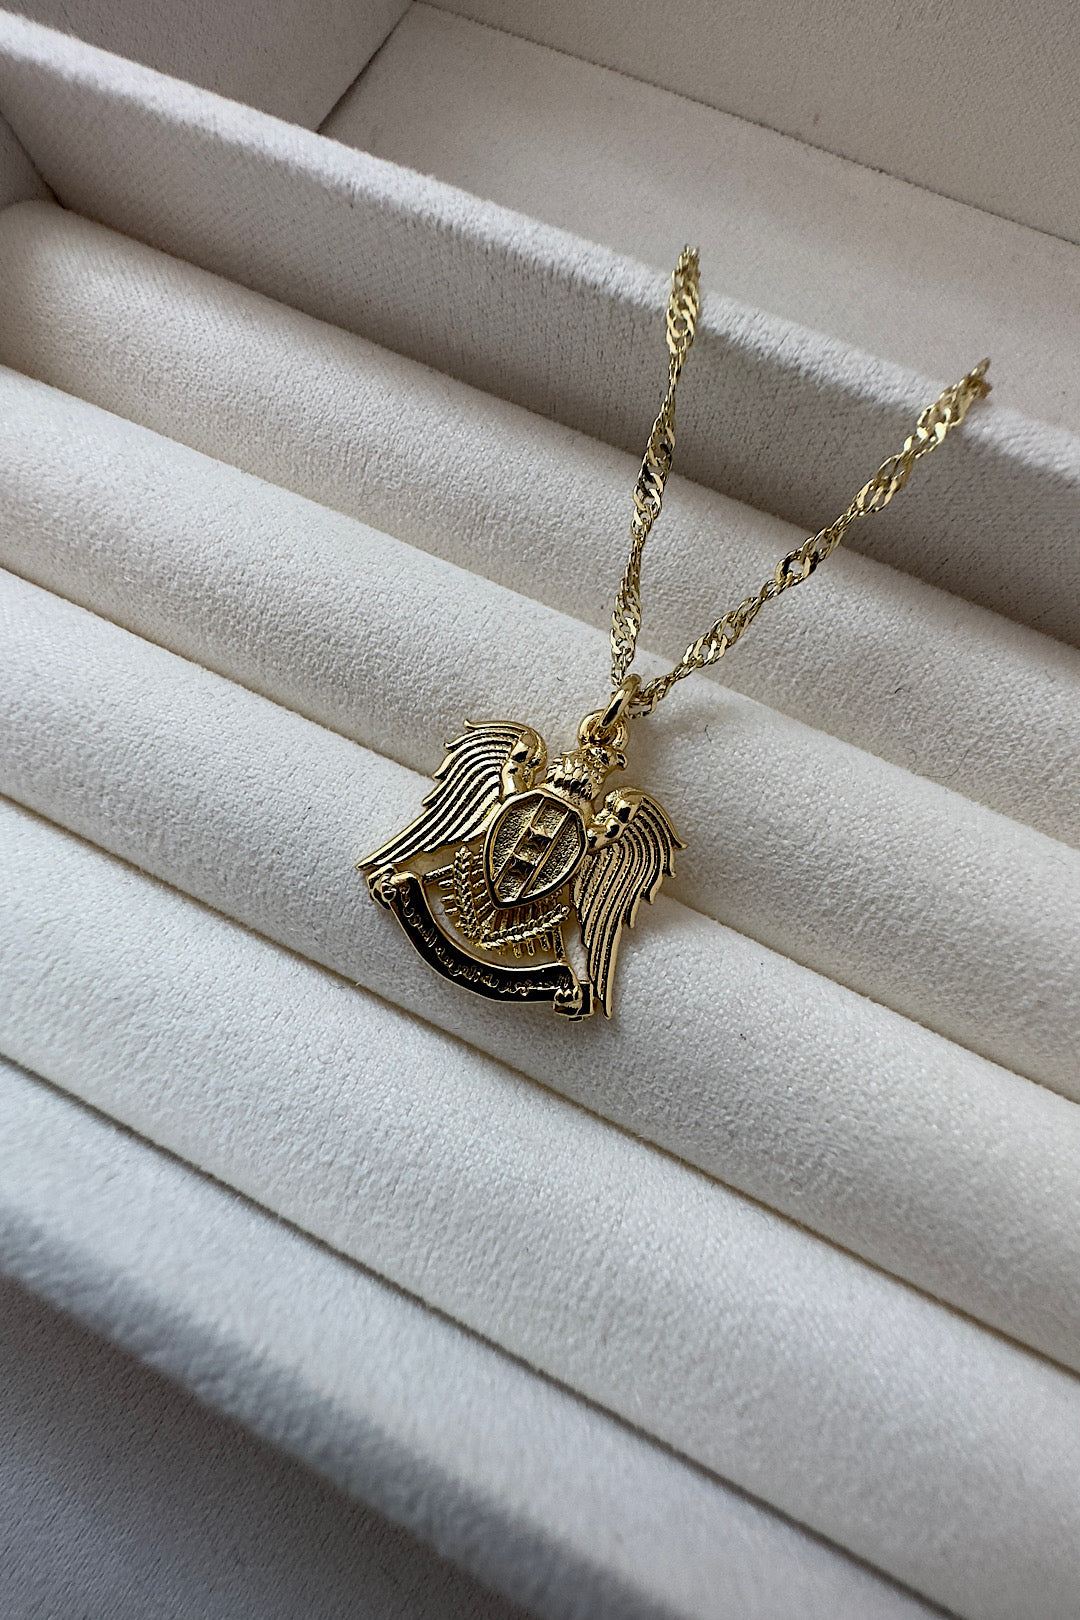 Syria Coat of Arms Gold Swirl Necklace 